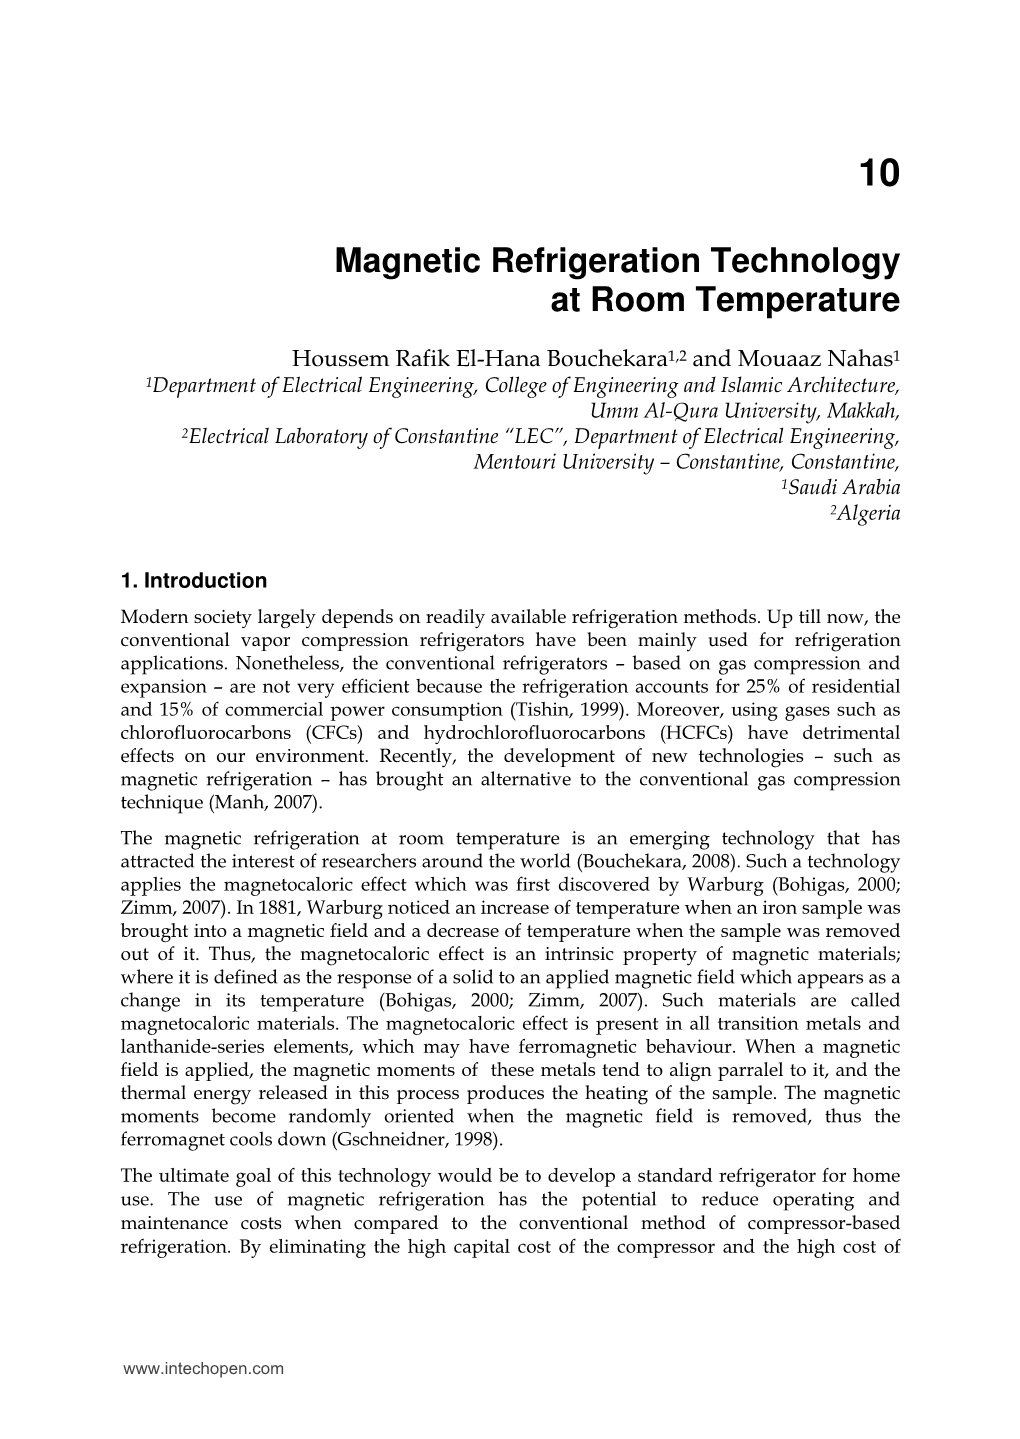 Magnetic Refrigeration Technology at Room Temperature